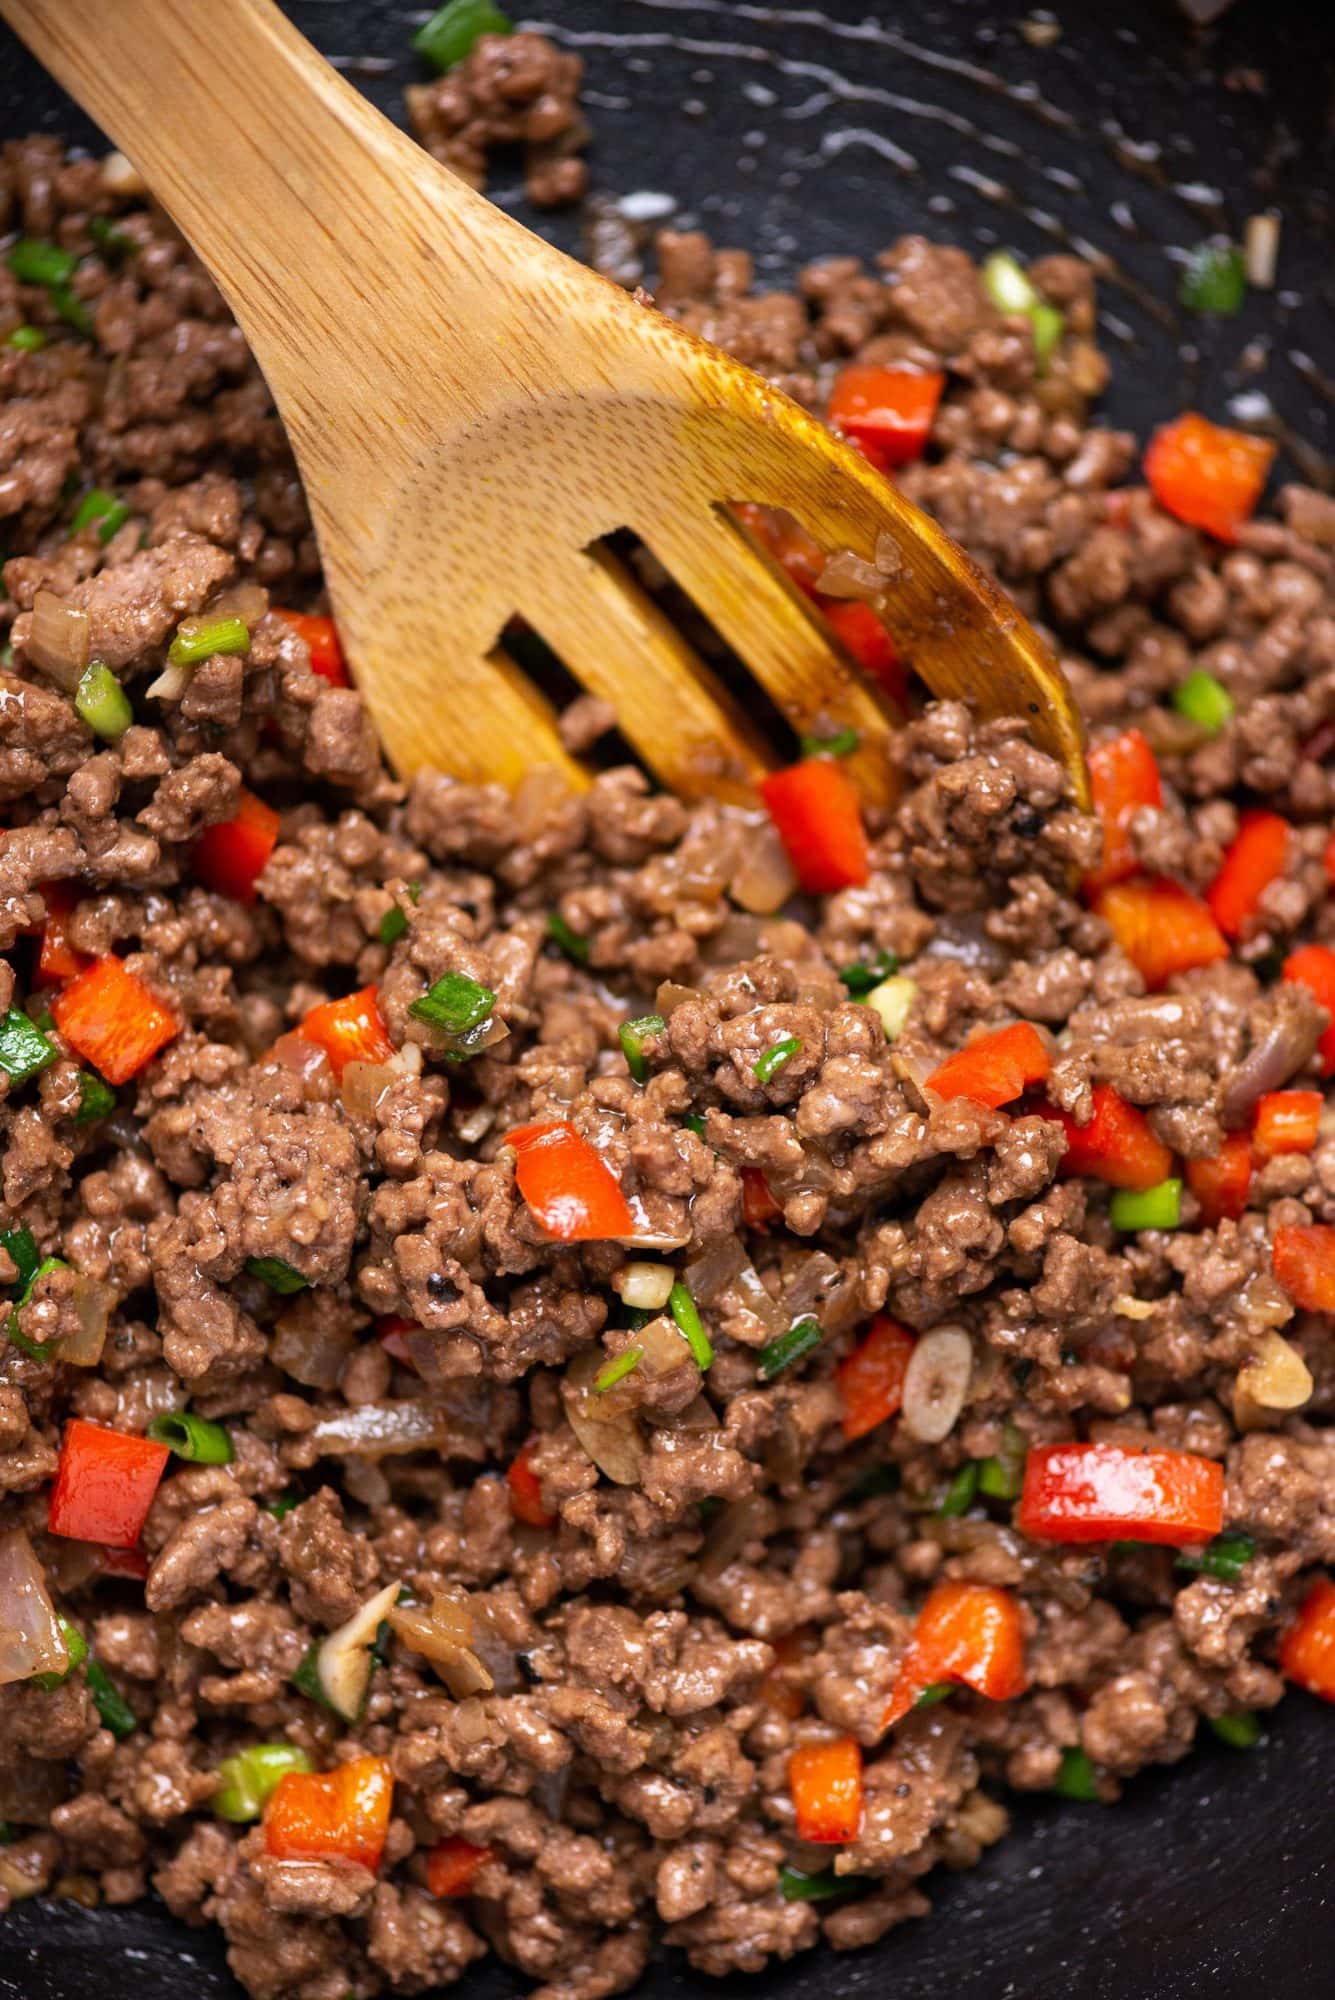 Close up picture of korean inspired juicy ground beef having red bell pepper and green onion stir fried in a wok with a wooden laddle.